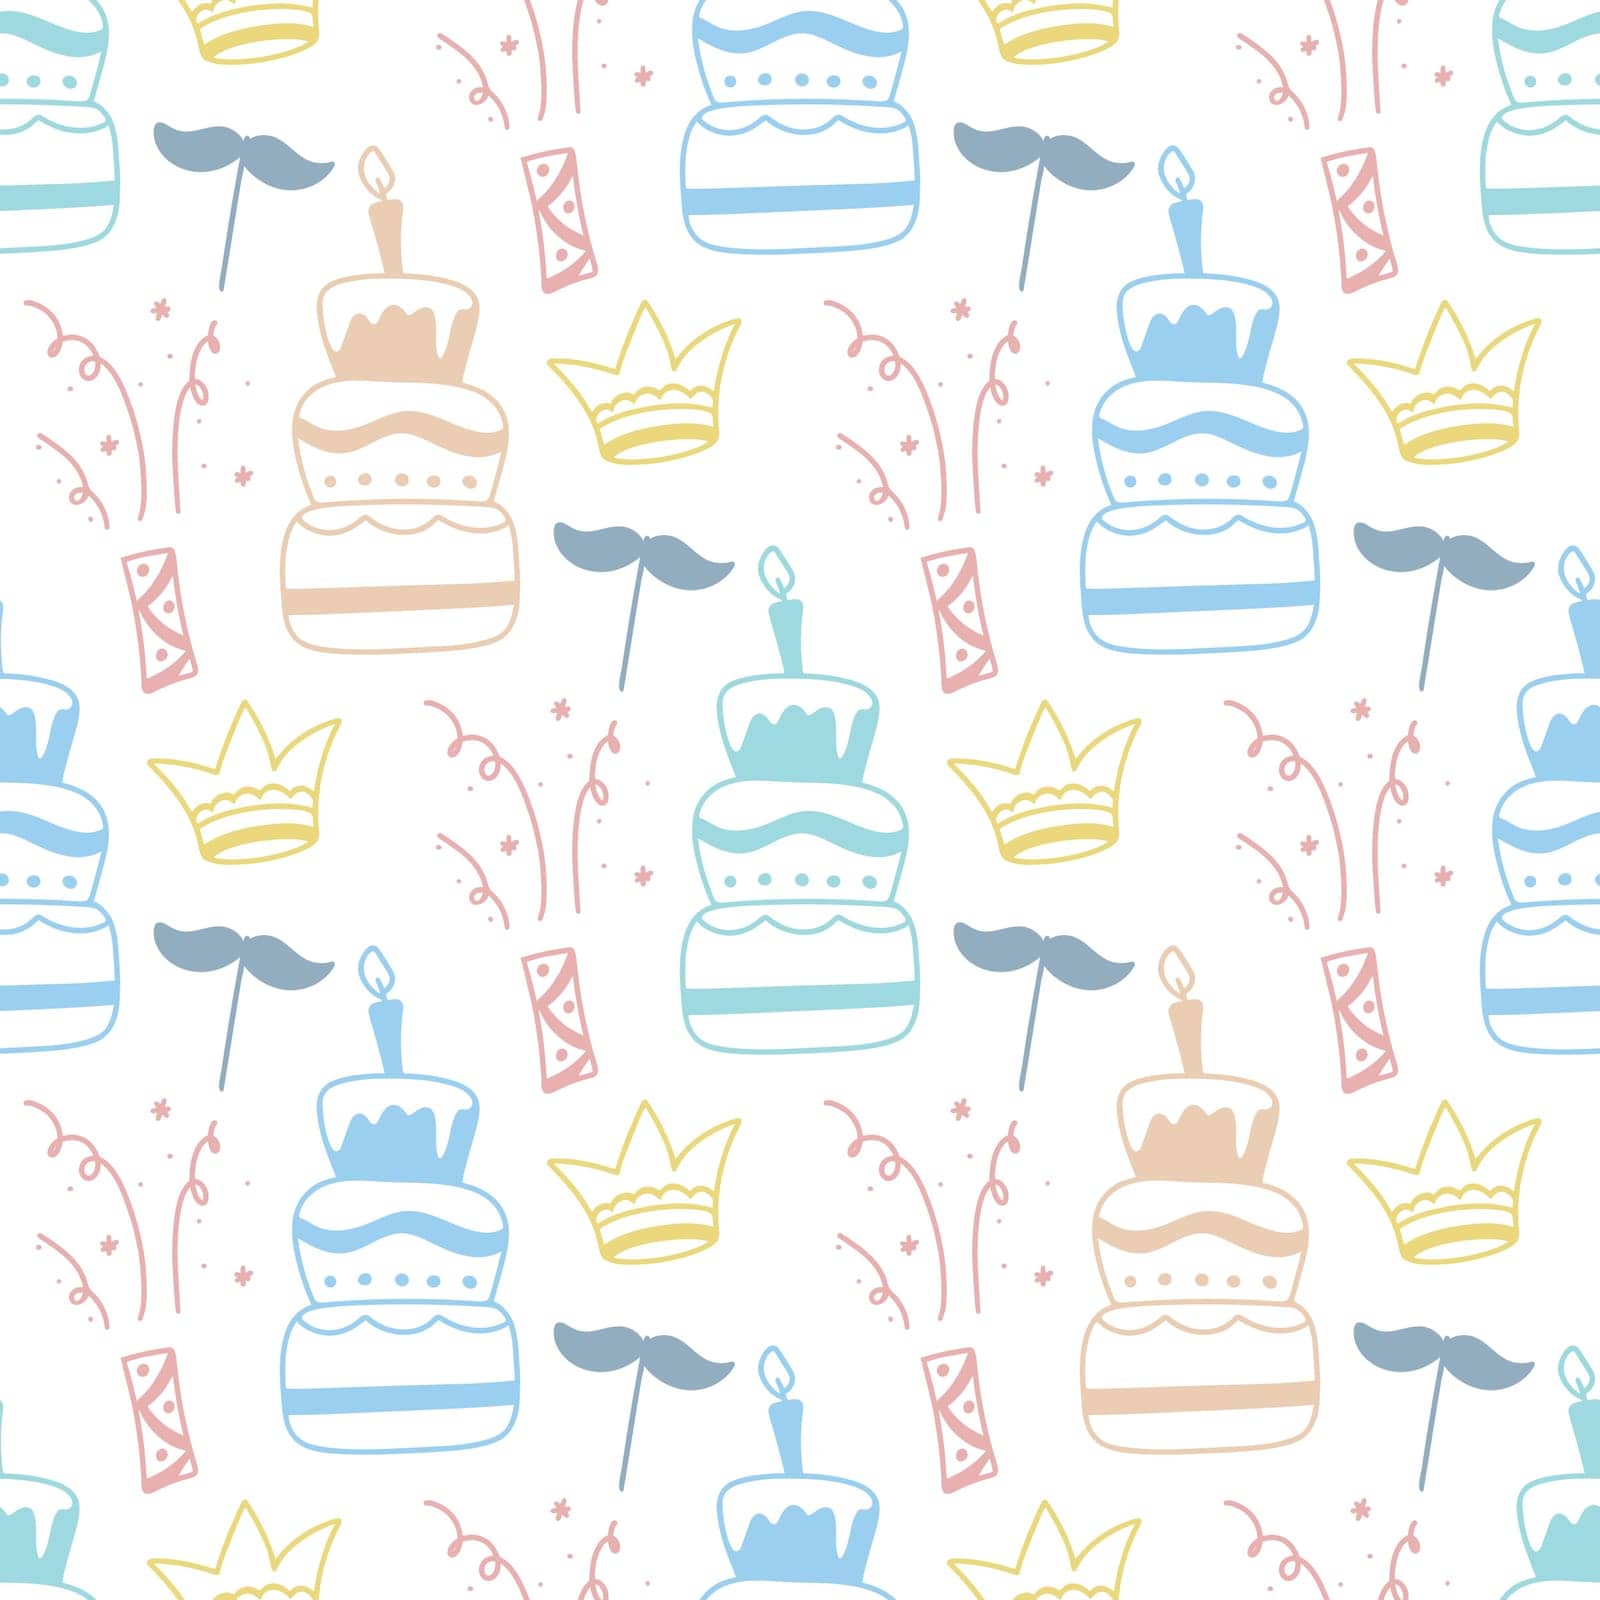 Birthday doodle seamless pattern vector graphics by TassiaK